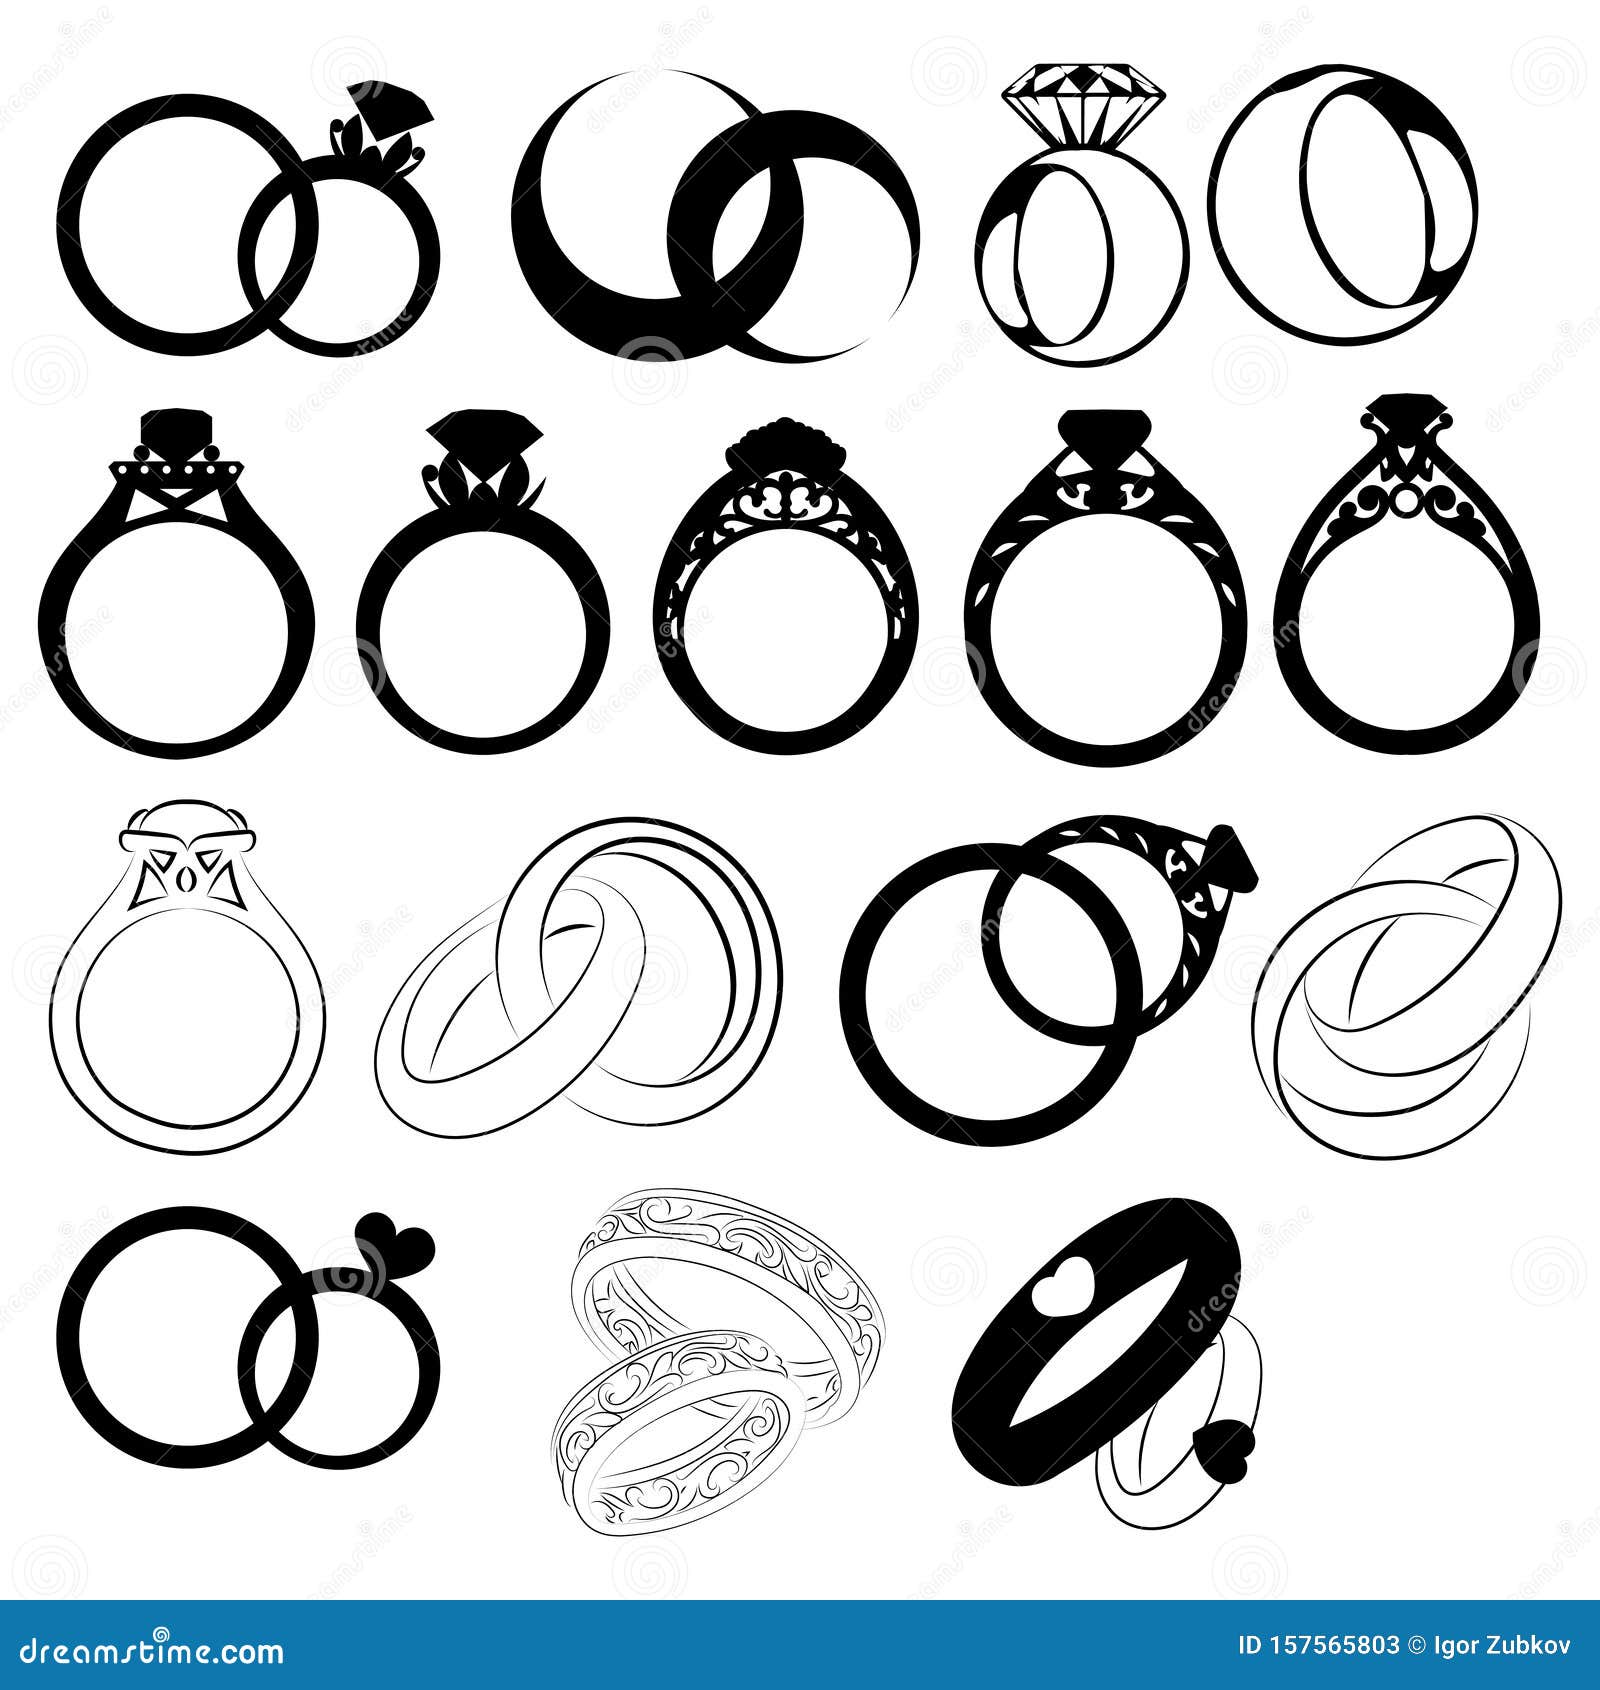 Rings White Transparent, Ring, Rings Clipart, Golden, Frame PNG Image For  Free Download | Graphic design background templates, Logo design art,  Decent wallpapers